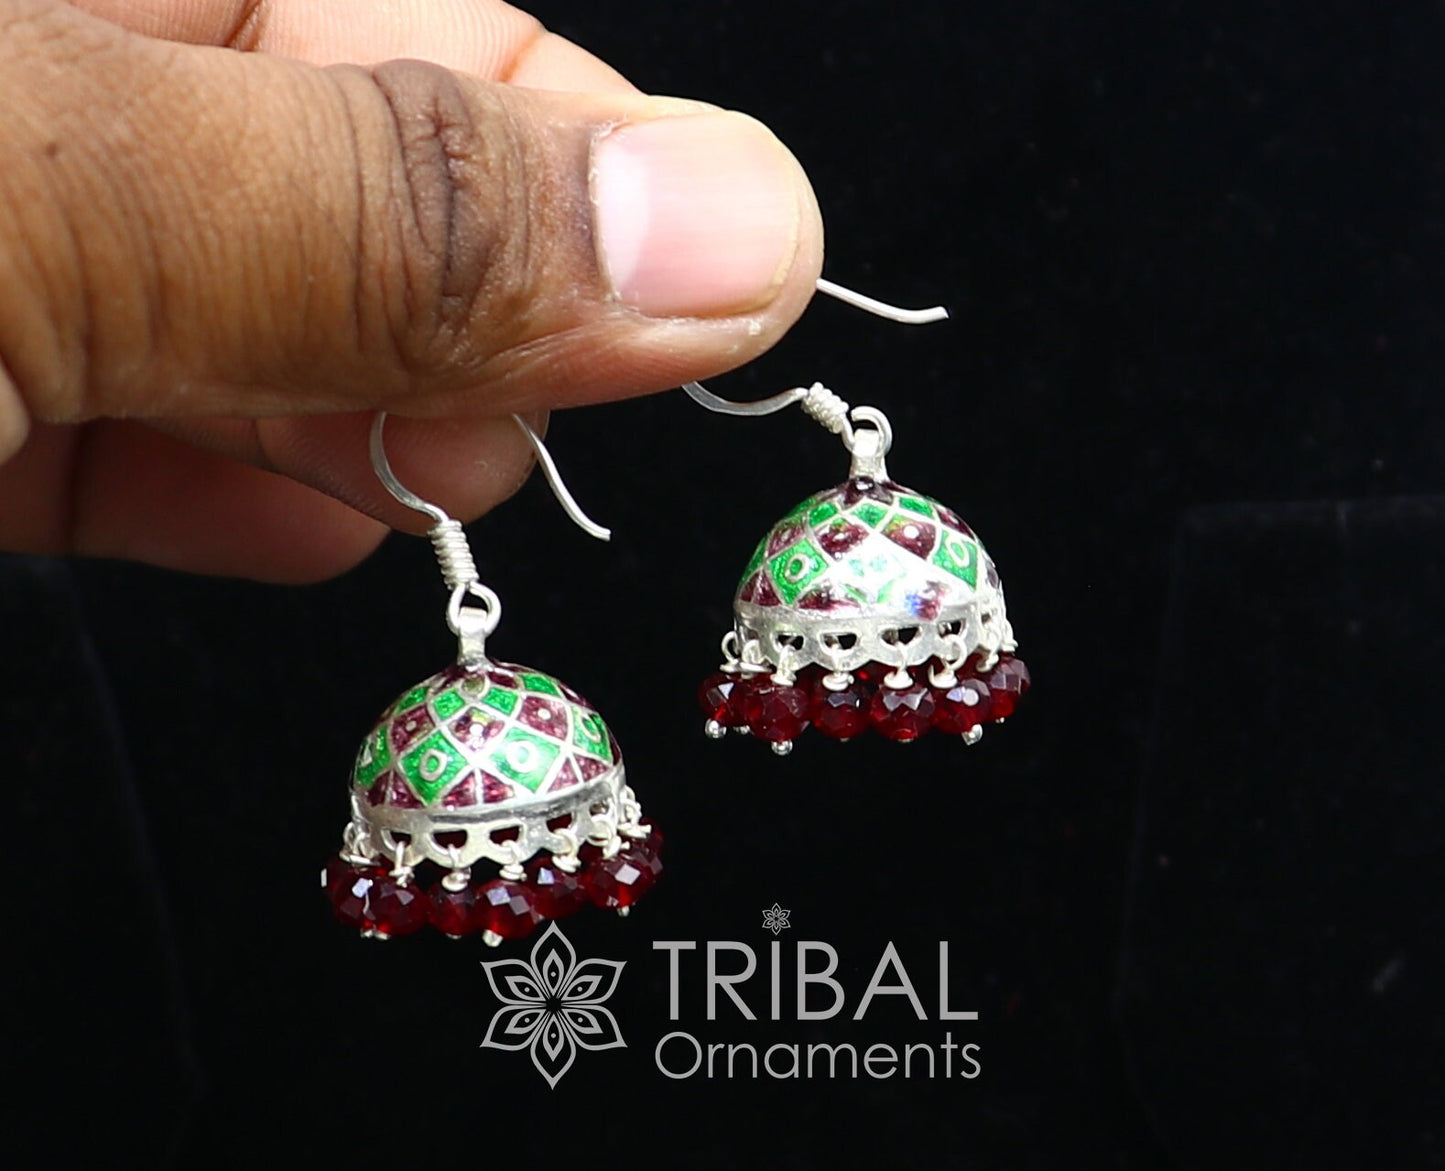 925 sterling silver handmade Stylish colorful hoops earring chandelier, enamel work jhumka with hanging drops best brides collection s1172 - TRIBAL ORNAMENTS